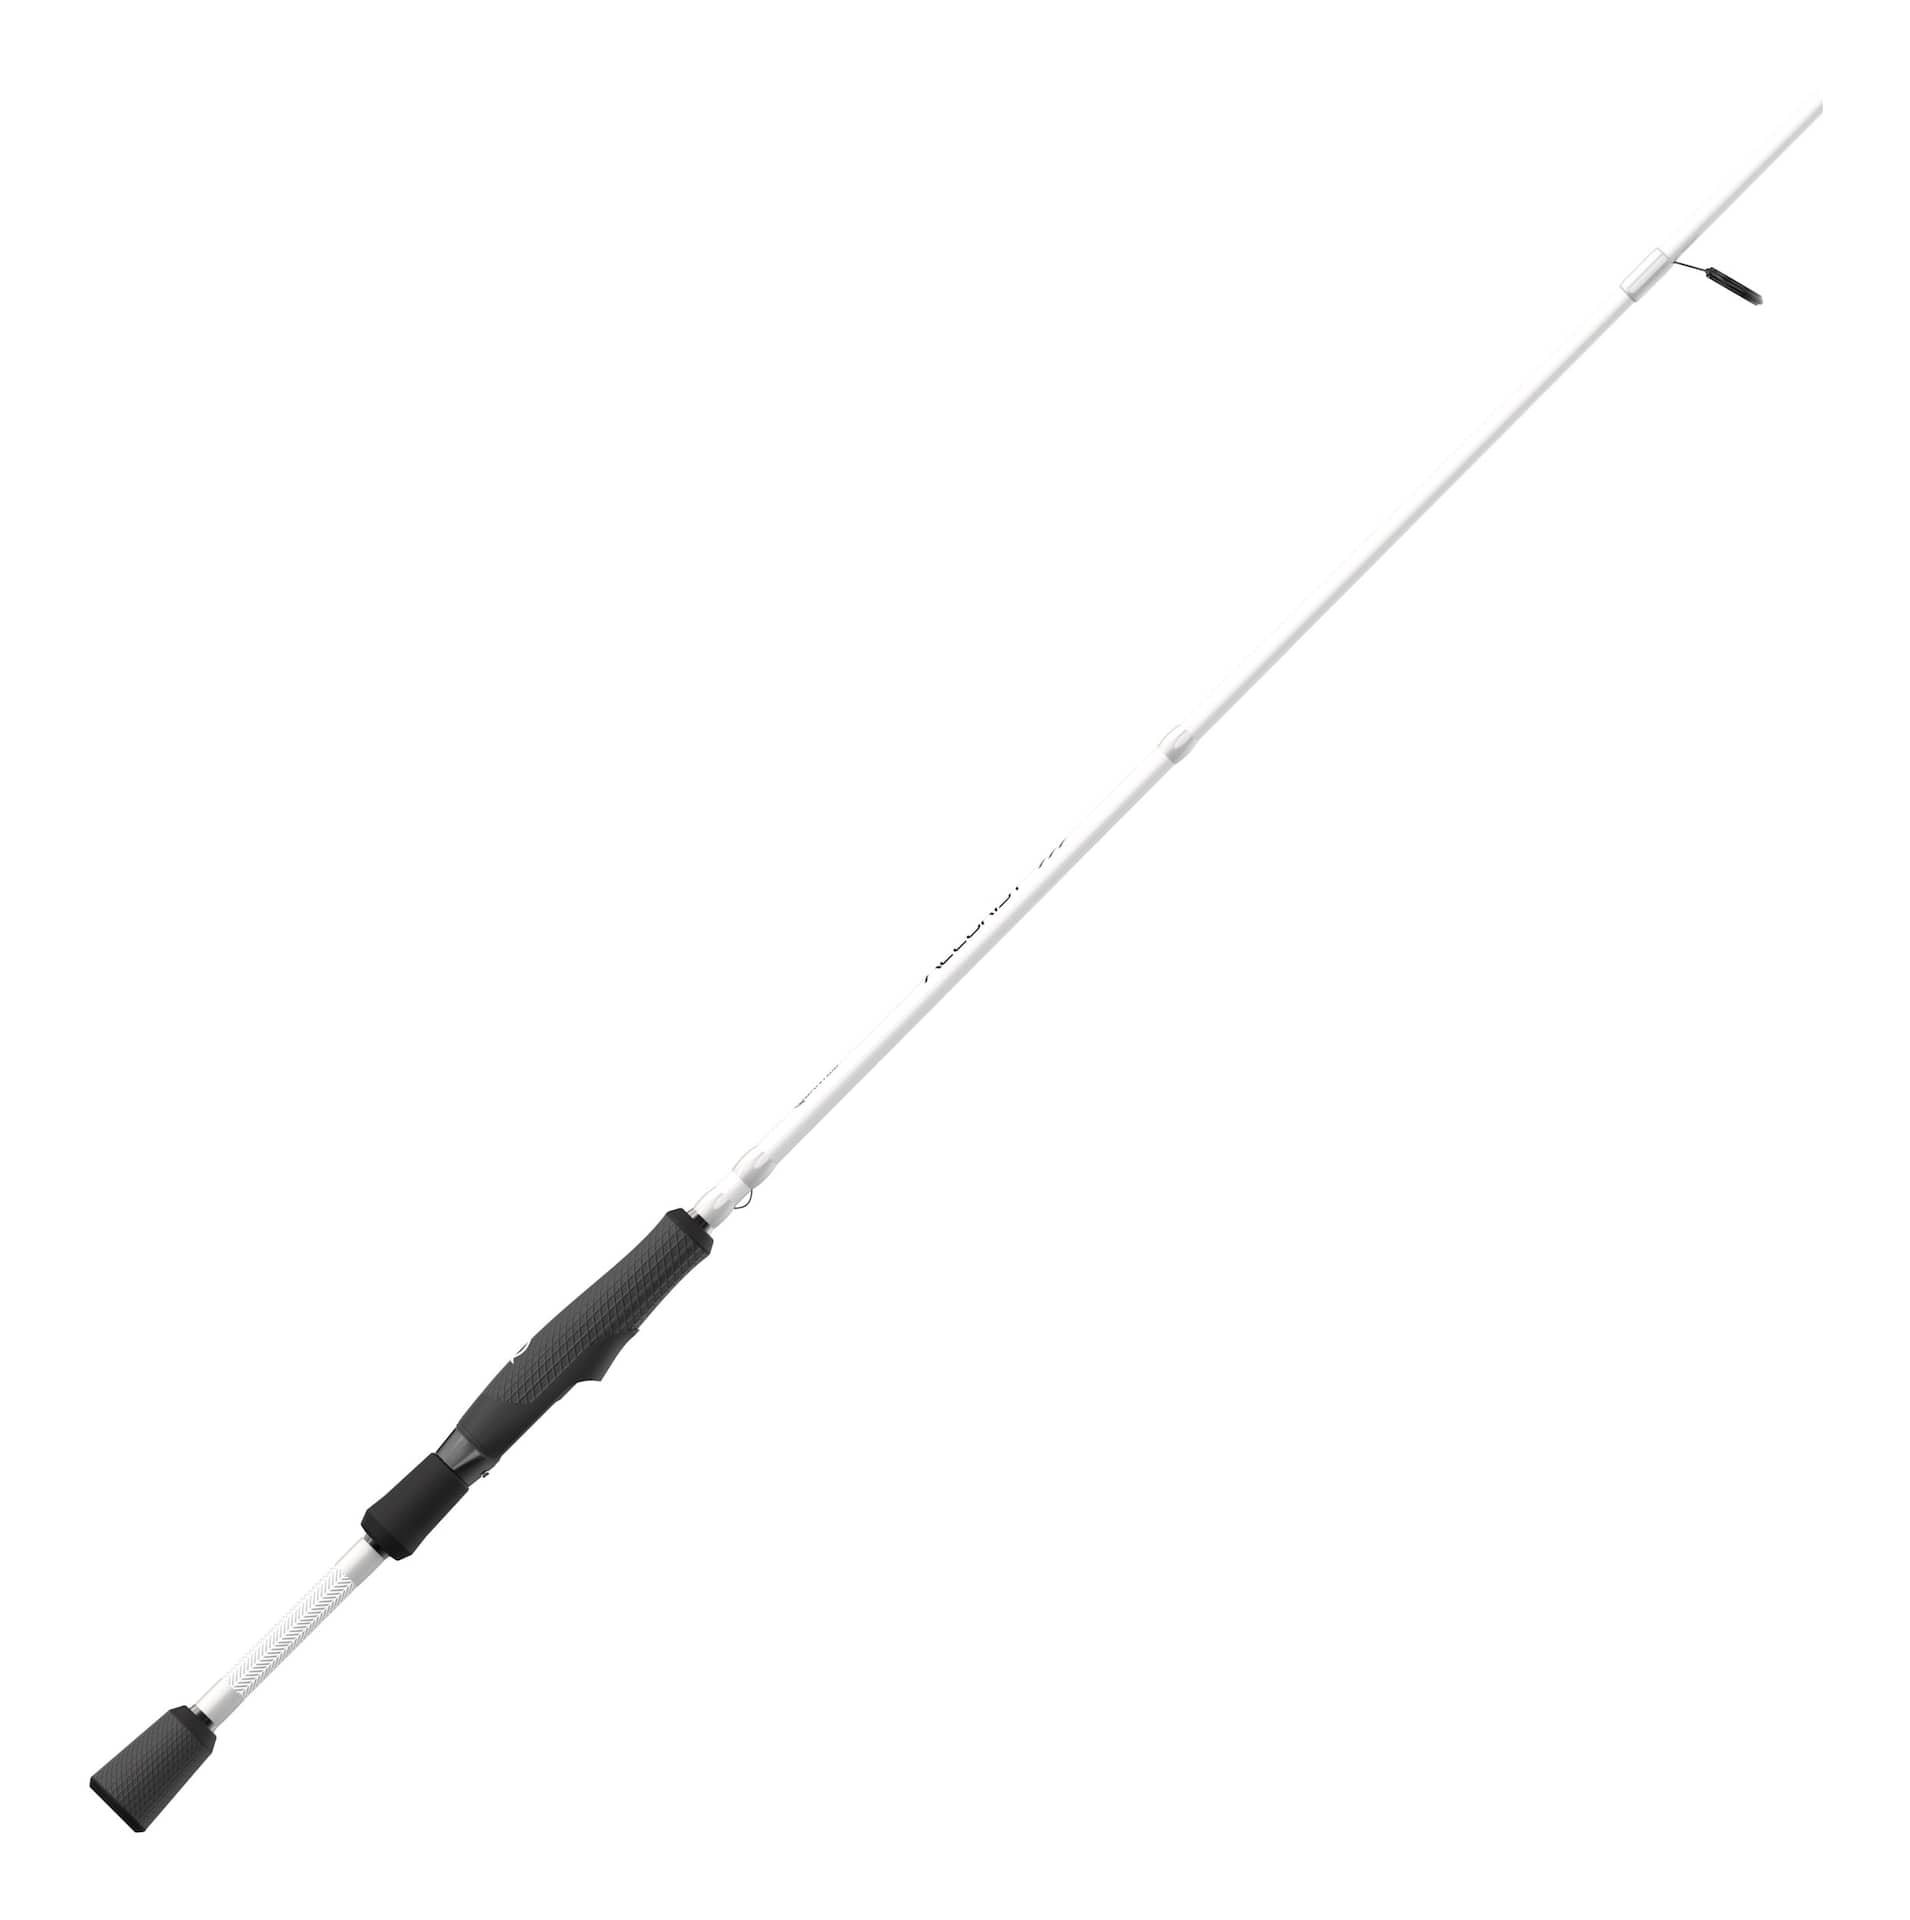 https://media-www.canadiantire.ca/product/playing/fishing/fishing-equipment/1784070/quantum-accurist-spinning-rod-6-6-medium-2cce8e63-8a3d-4744-adb9-e059e3207060-jpgrendition.jpg